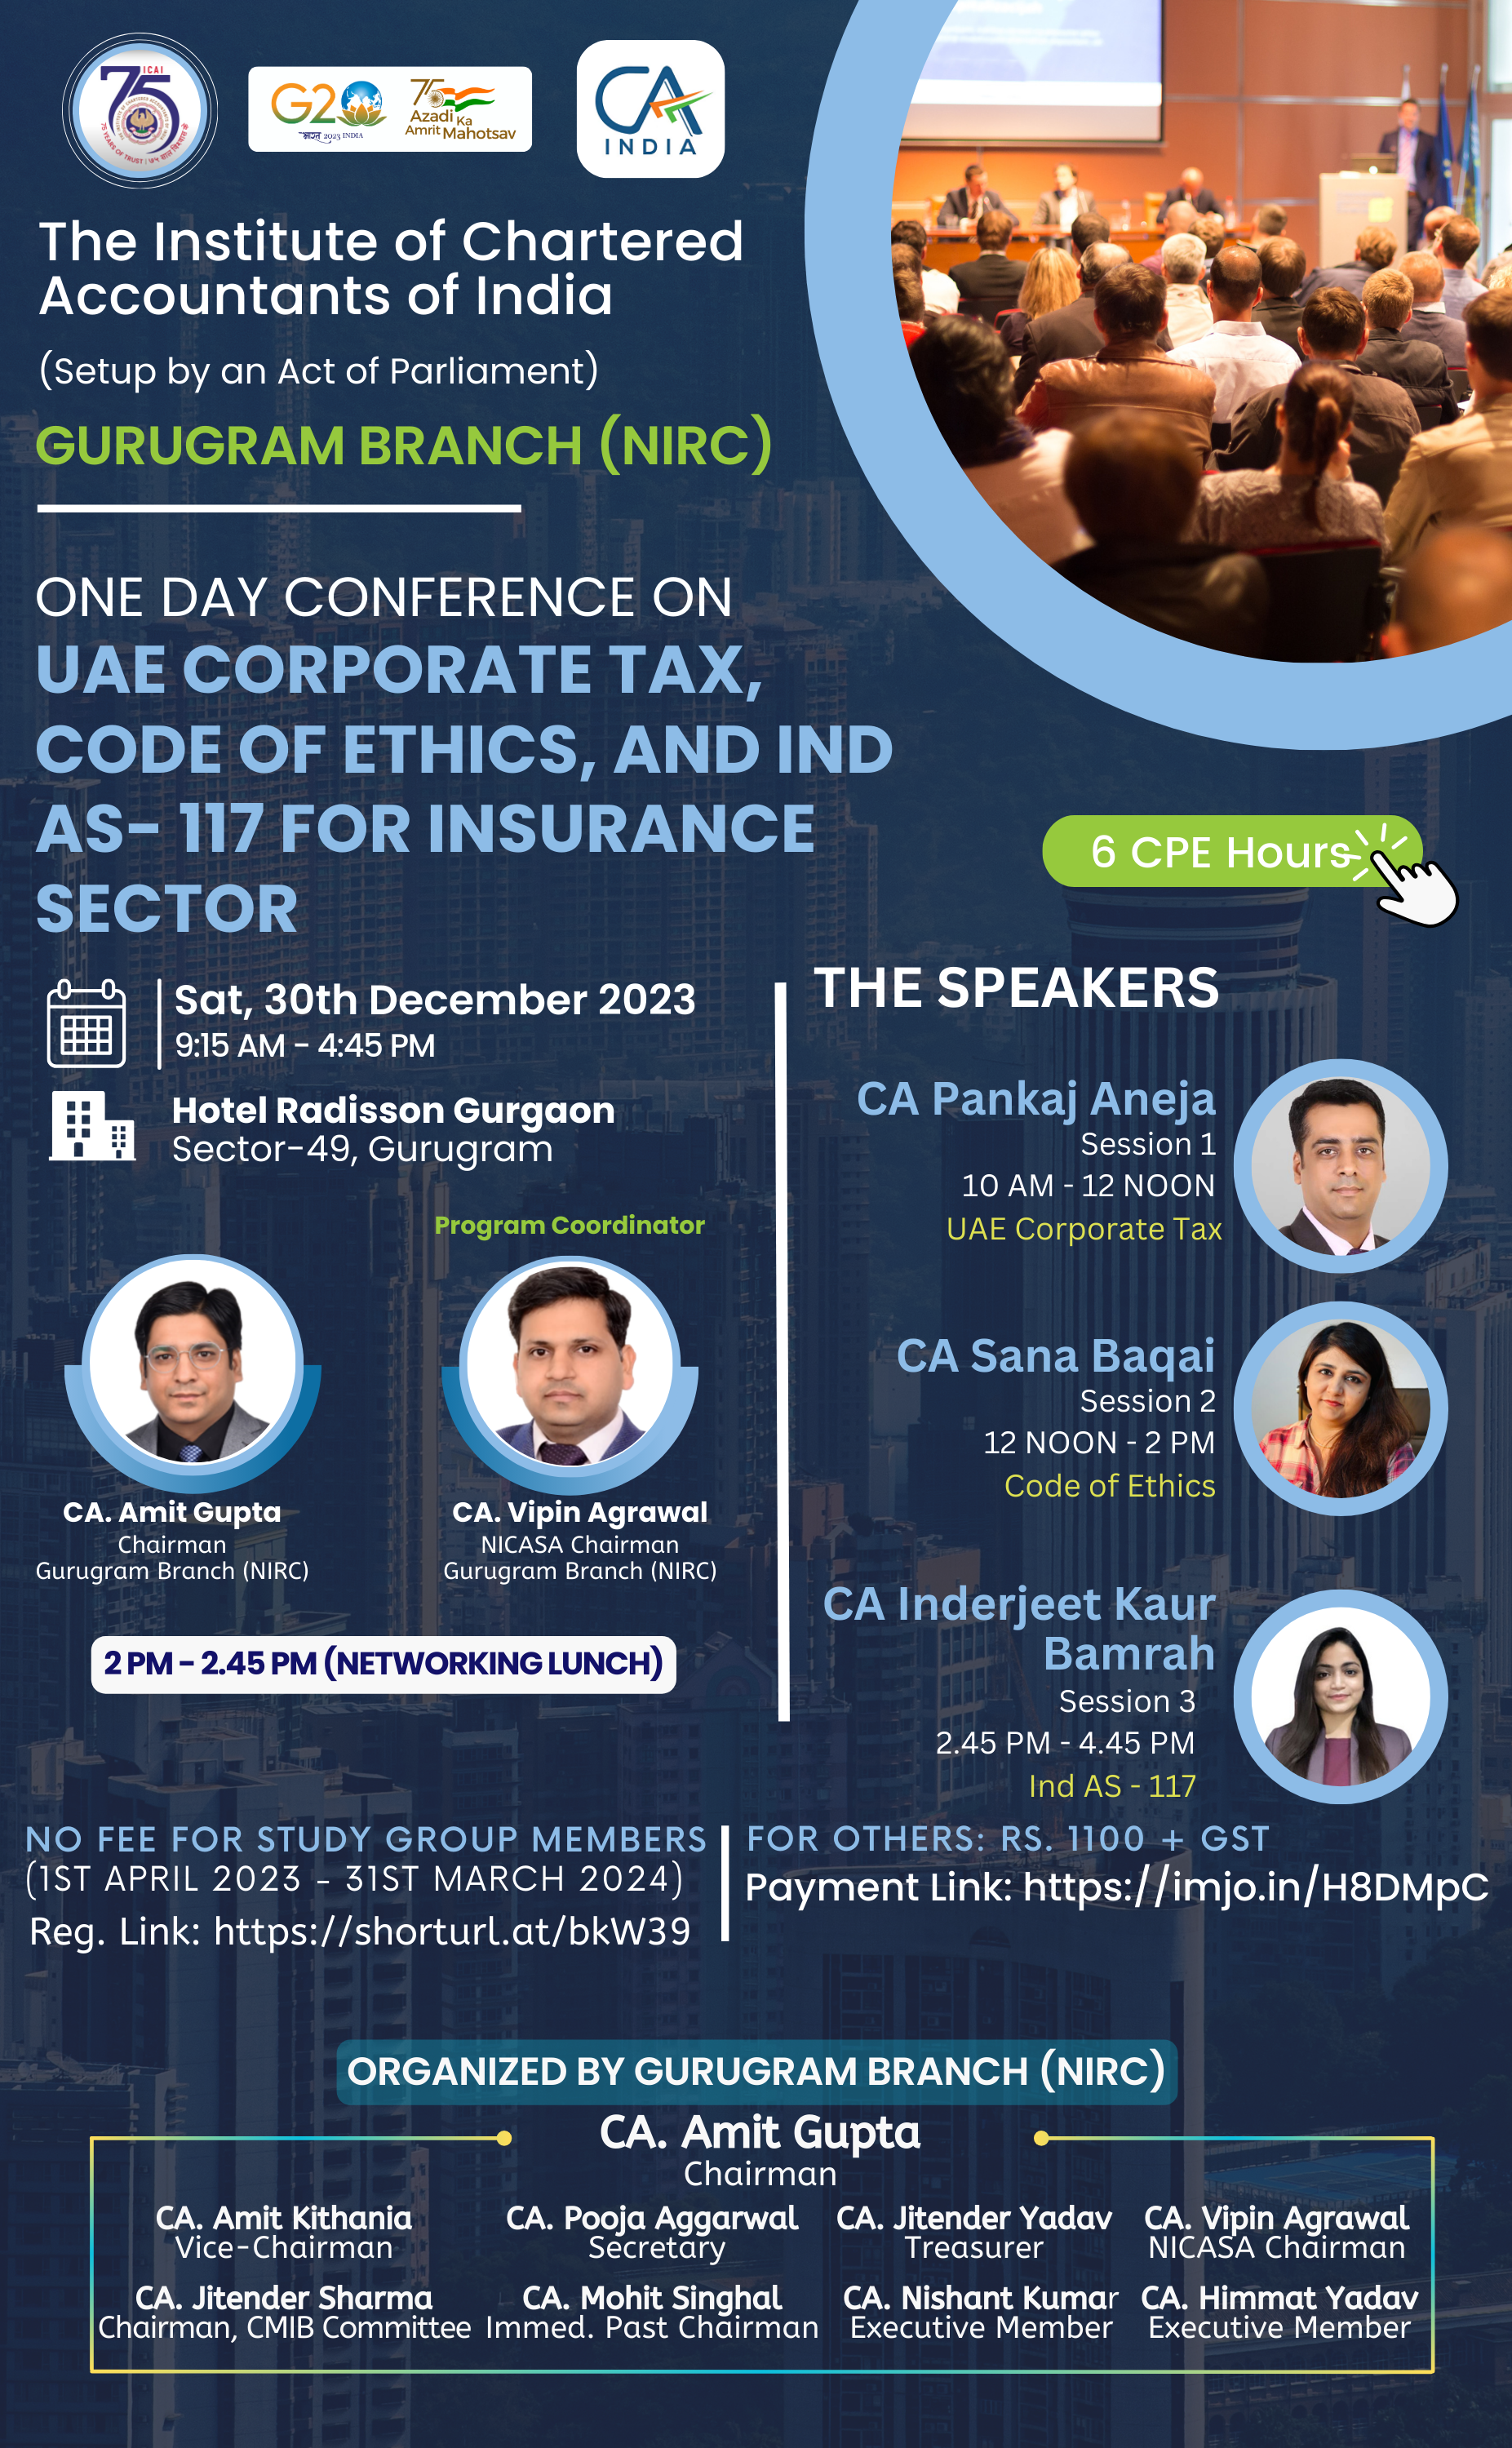 Conference on UAE Corporate Tax, Code of Ethics and Ind AS- 117 for Insurance Sector